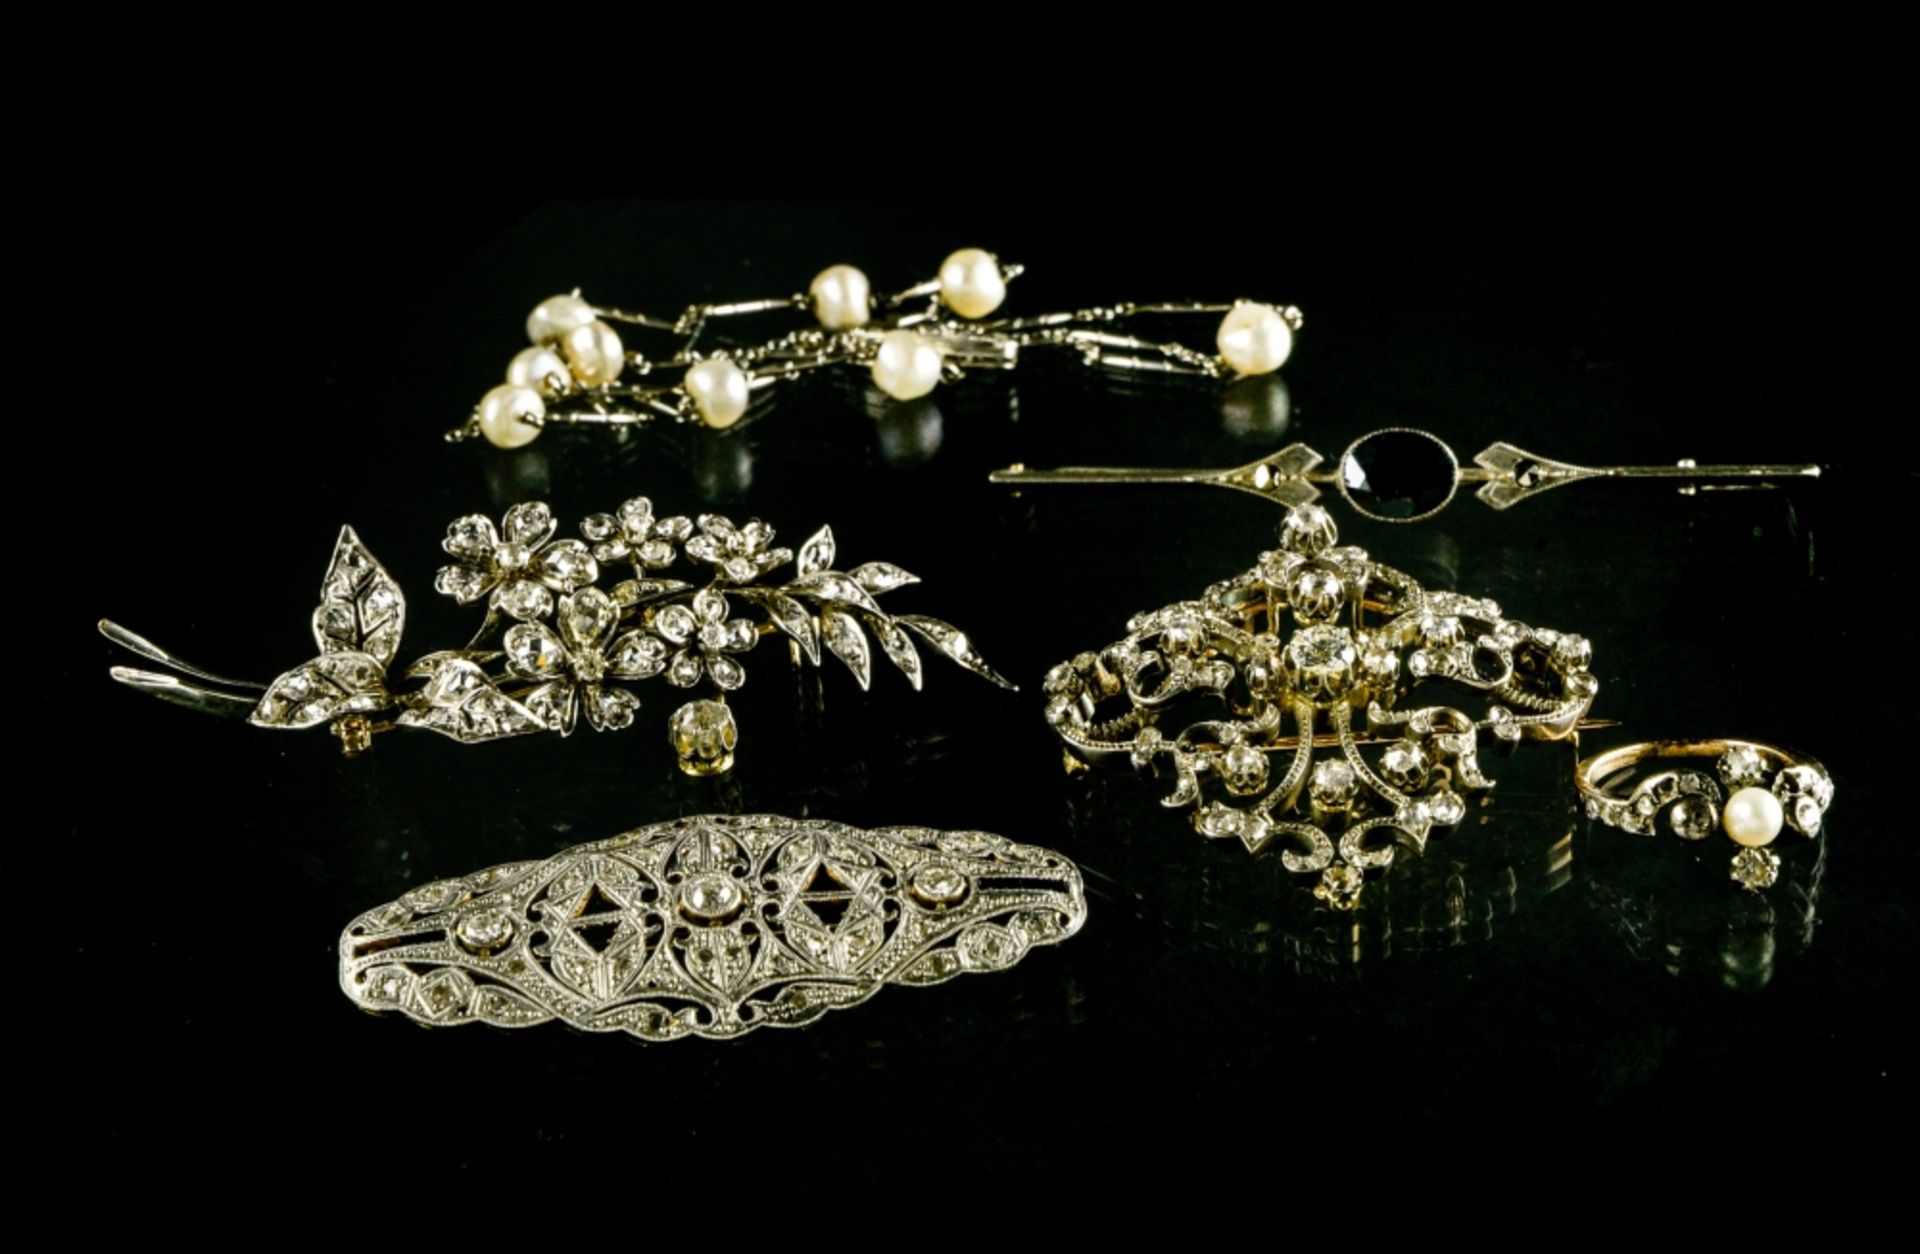 Jewellery set BELLE EPOQUE AND ART DƒCO Includes: A brooch with silver foliage on gold, set with